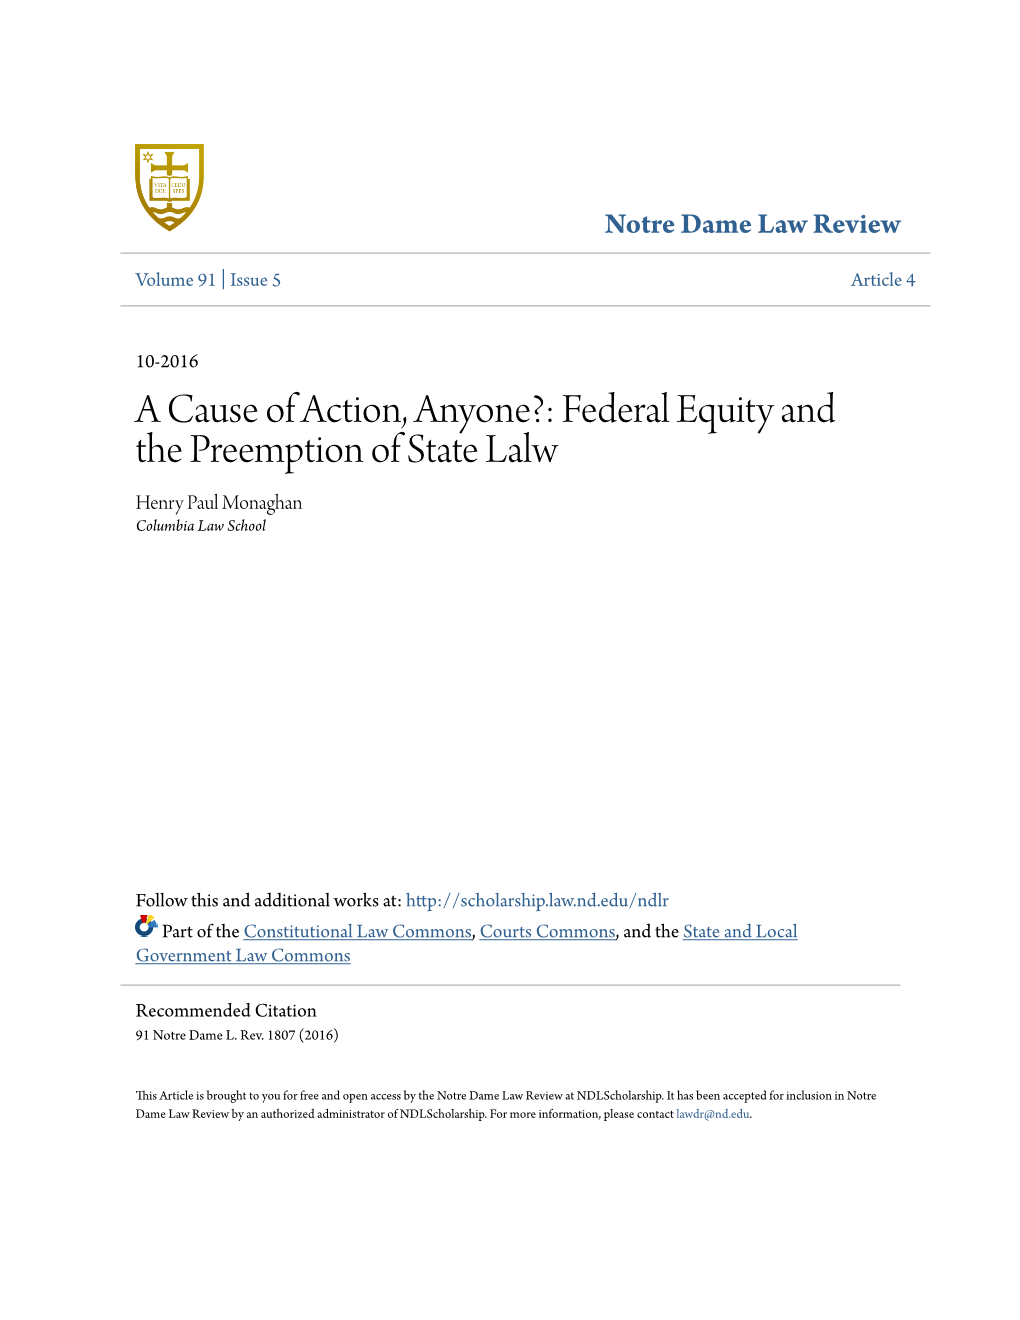 A Cause of Action, Anyone?: Federal Equity and the Preemption of State Lalw Henry Paul Monaghan Columbia Law School